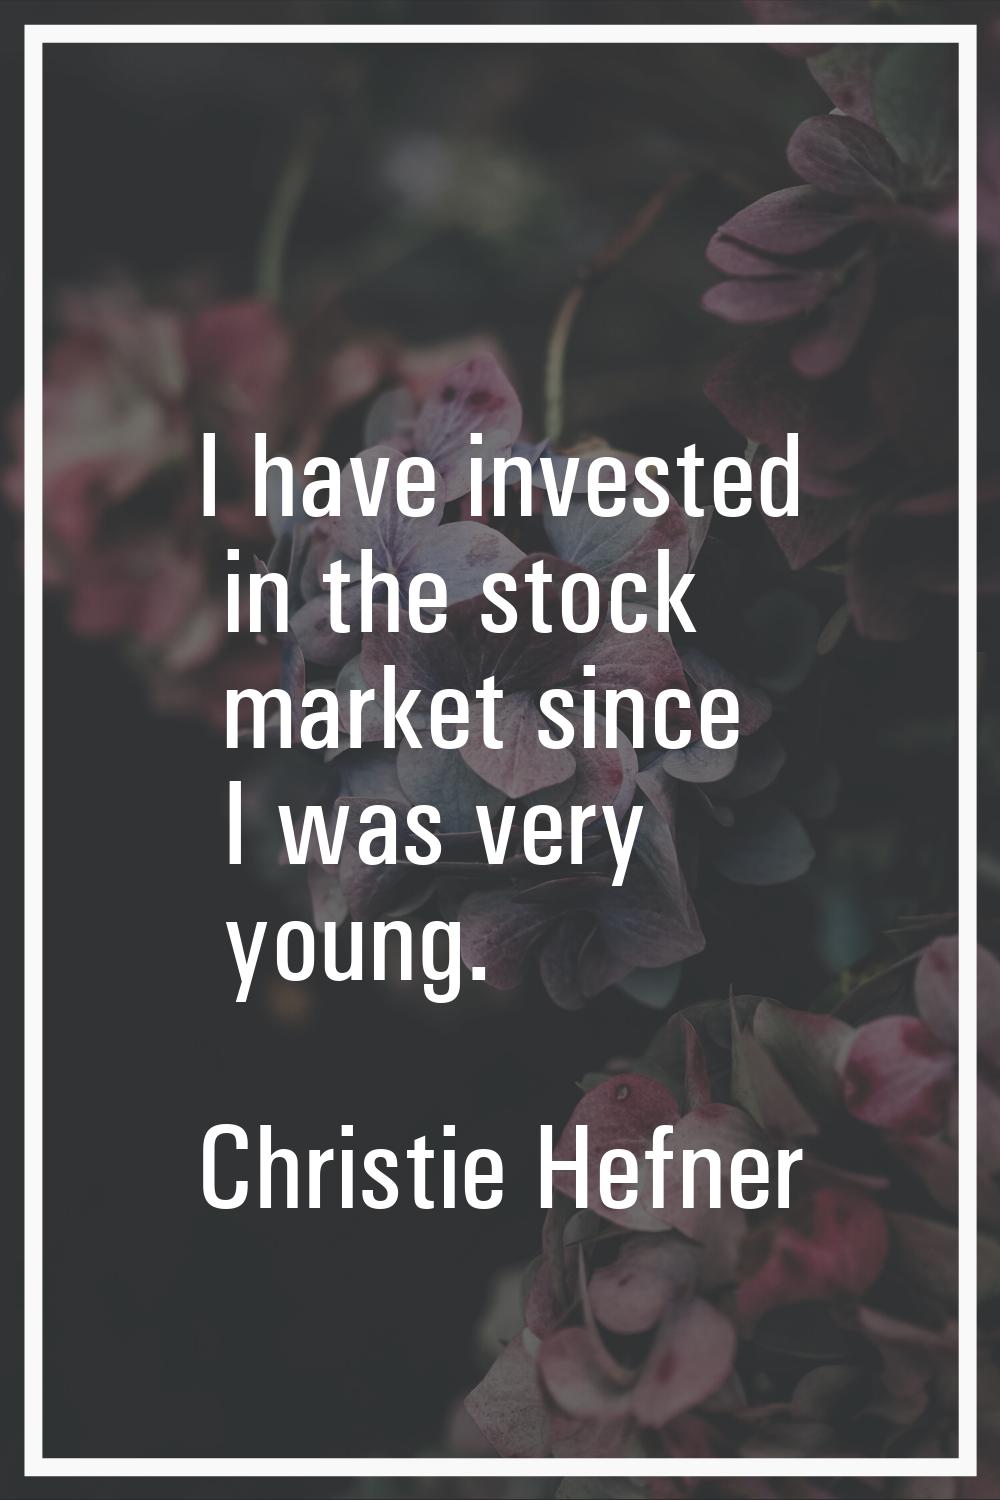 I have invested in the stock market since I was very young.